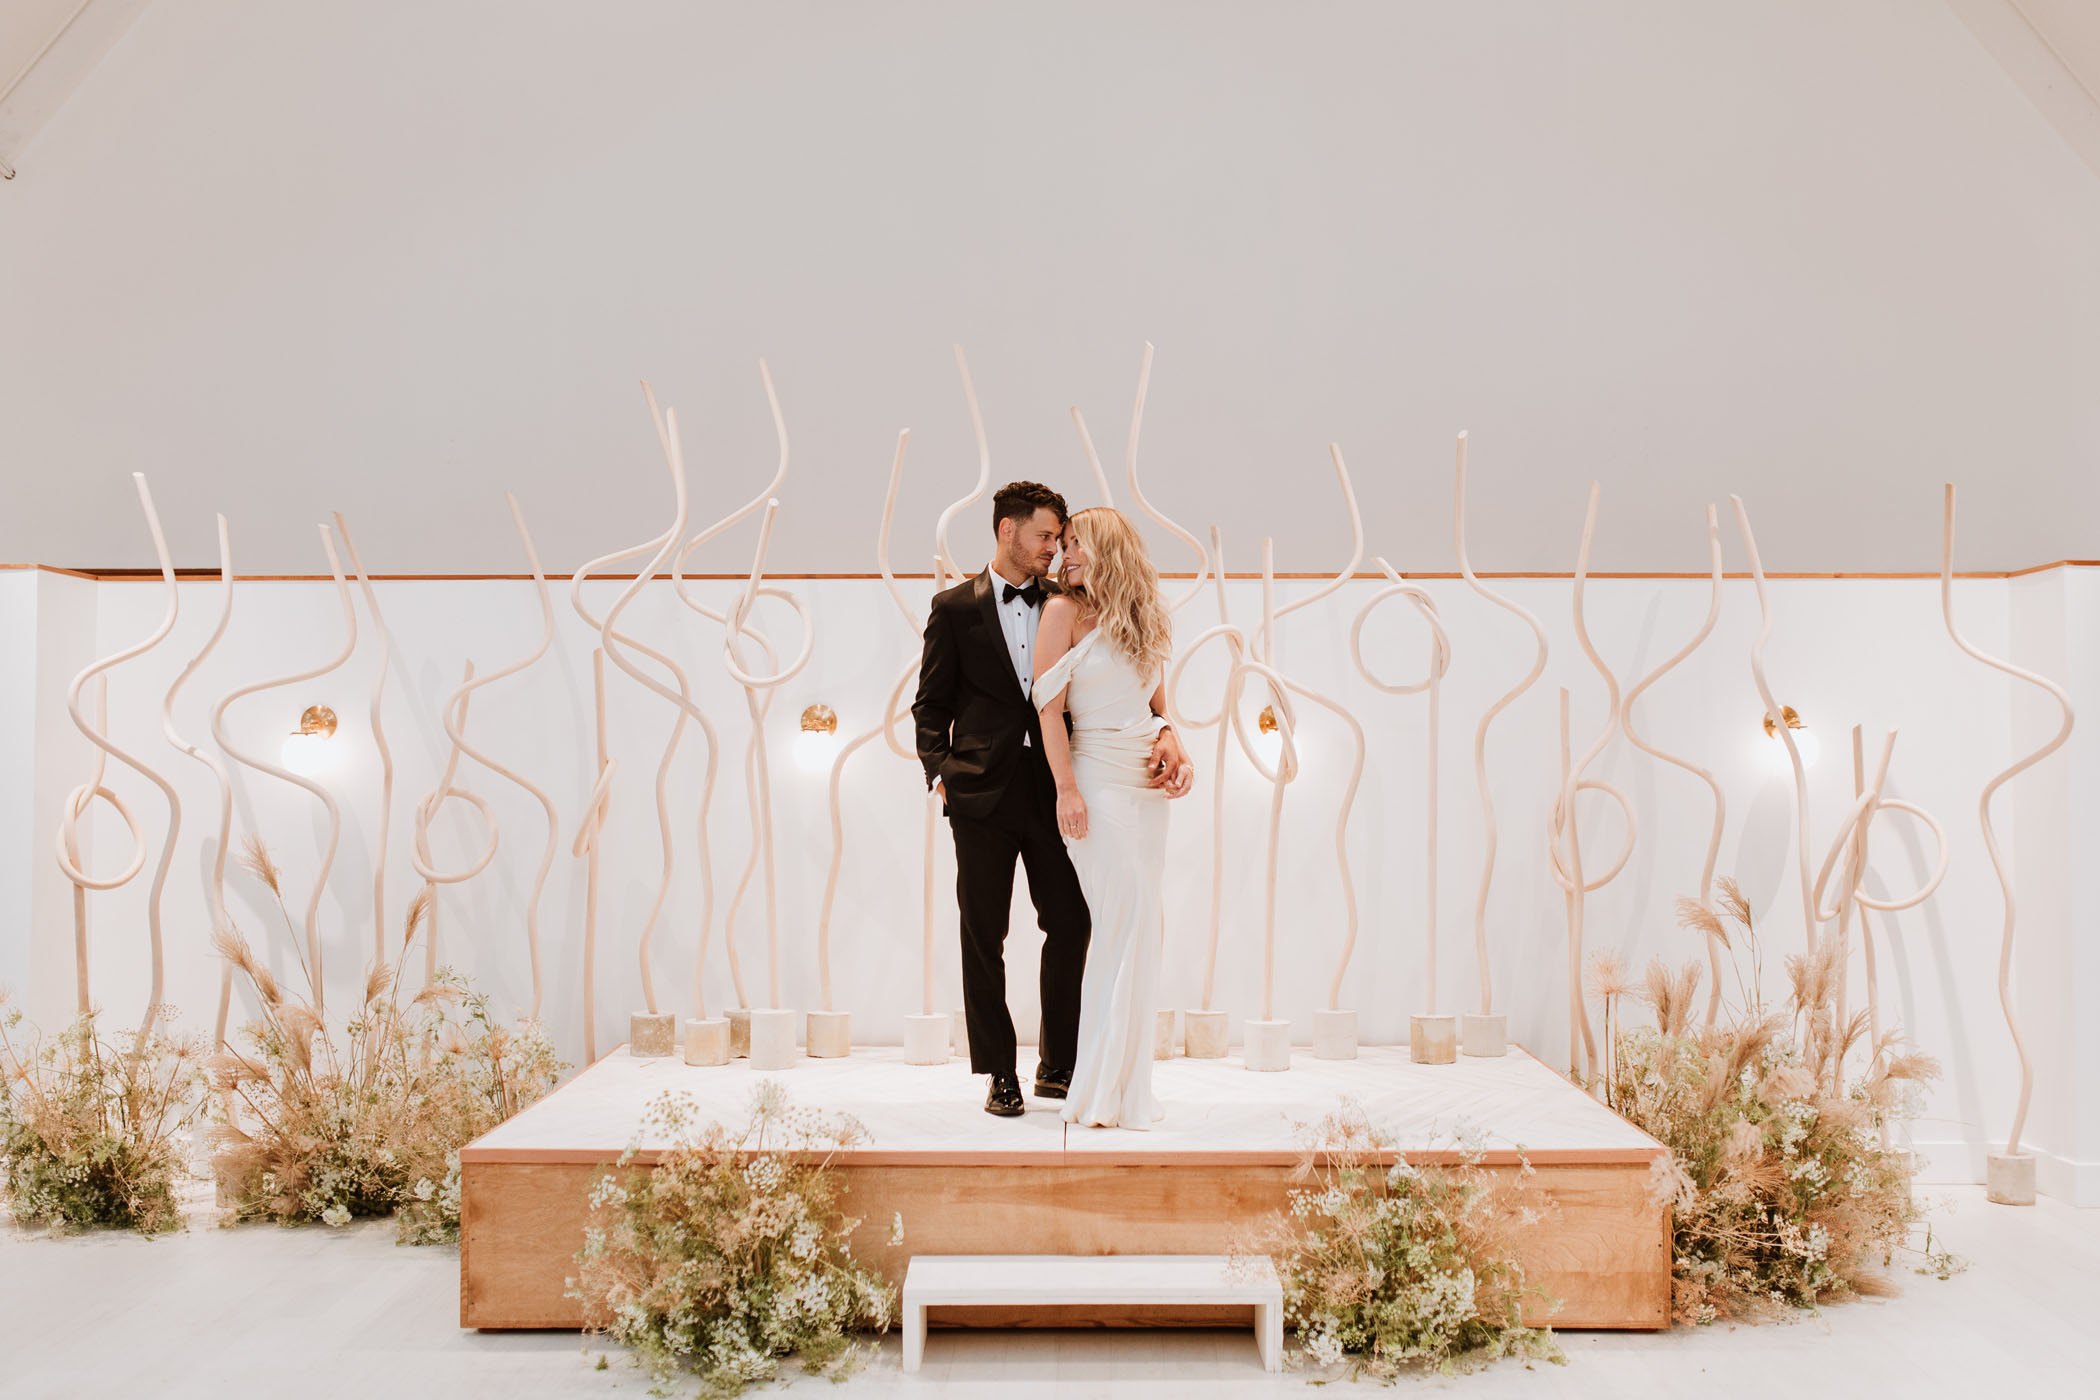 A Church Was Transformed Into a Modern Art Exhibit for This Marvelous Wedding